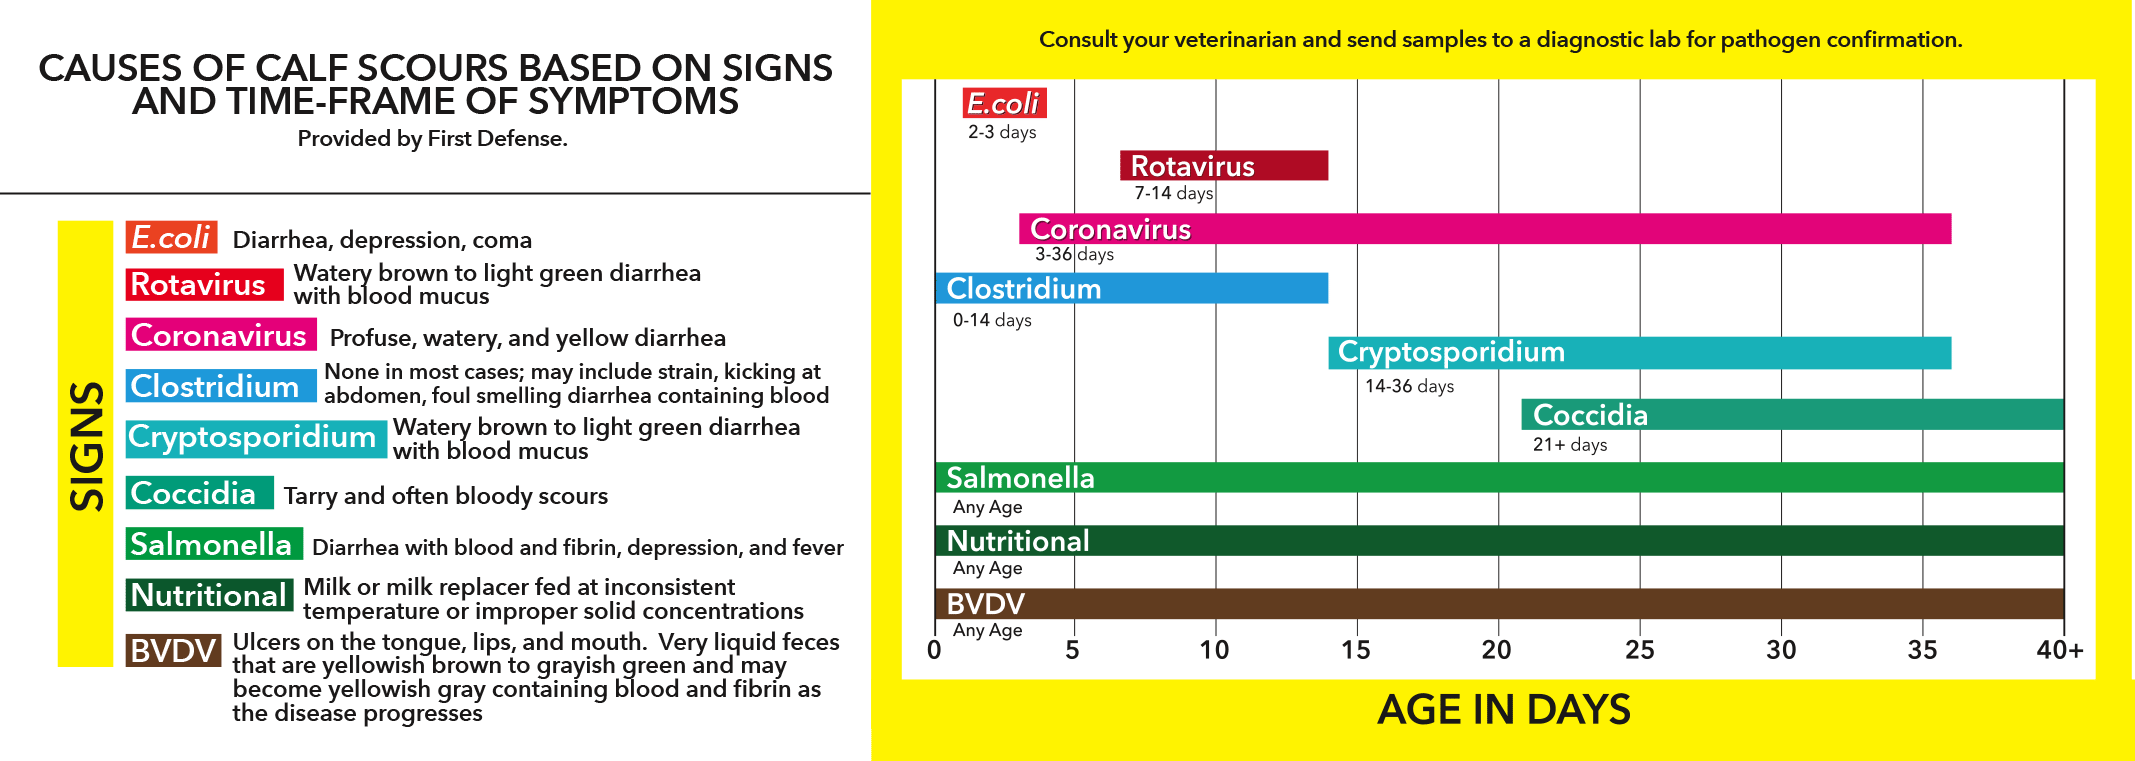 CAUSES OF CALF SCOURS BASED ON SIGNS AND TIME-FRAME OF SYMPTOMS